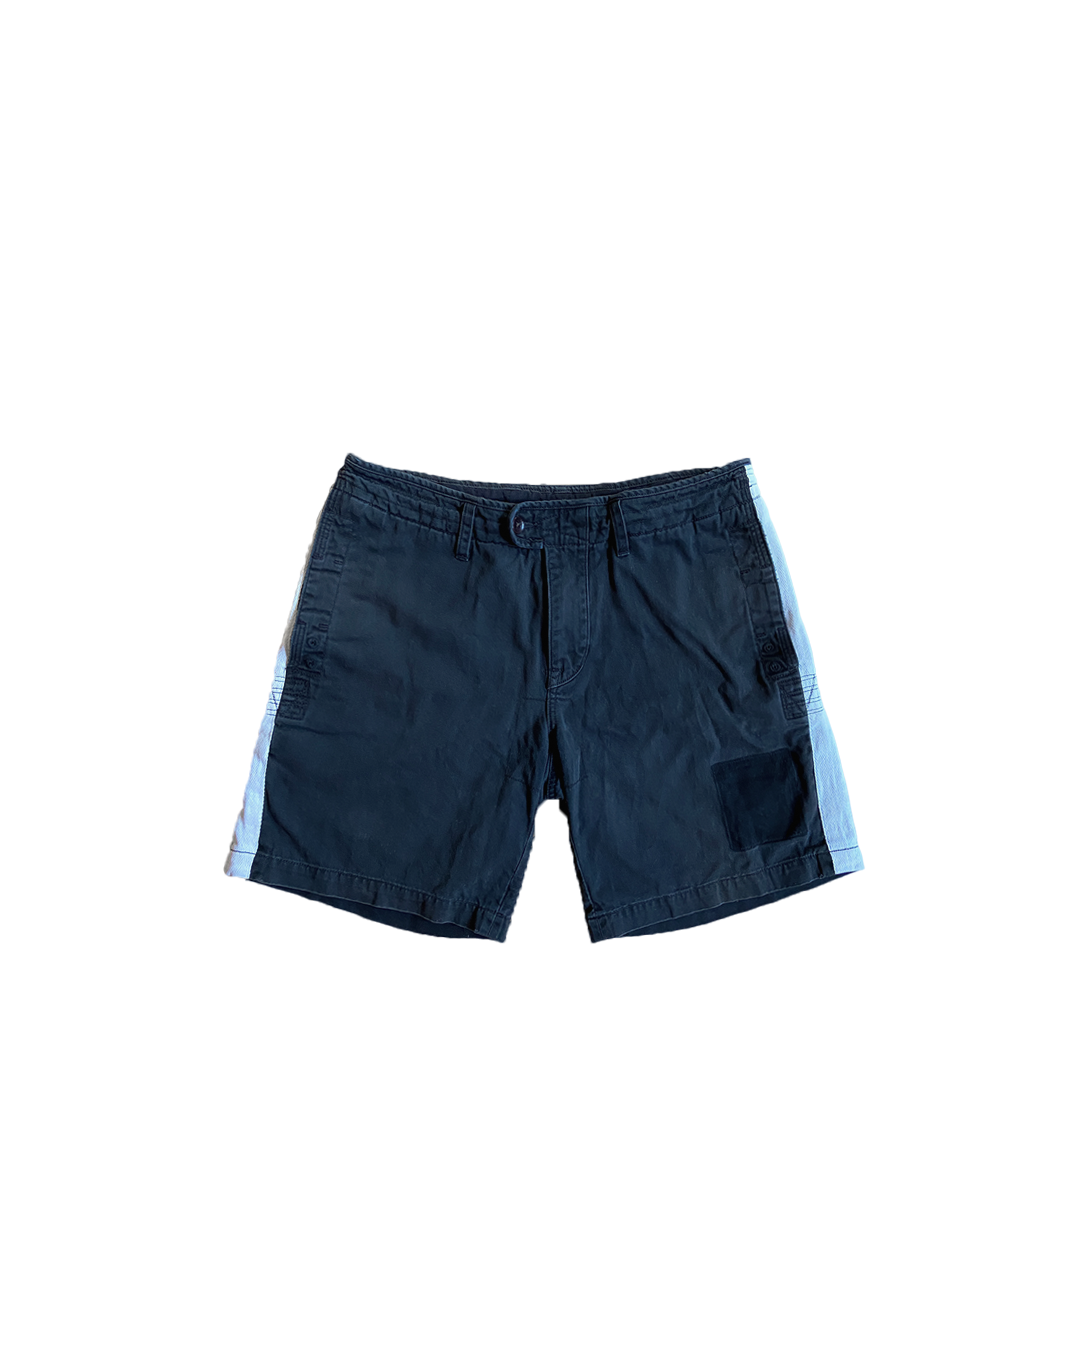 Ralph Lauren Un-Badged Faded Navy Rowing Rugby Shorts